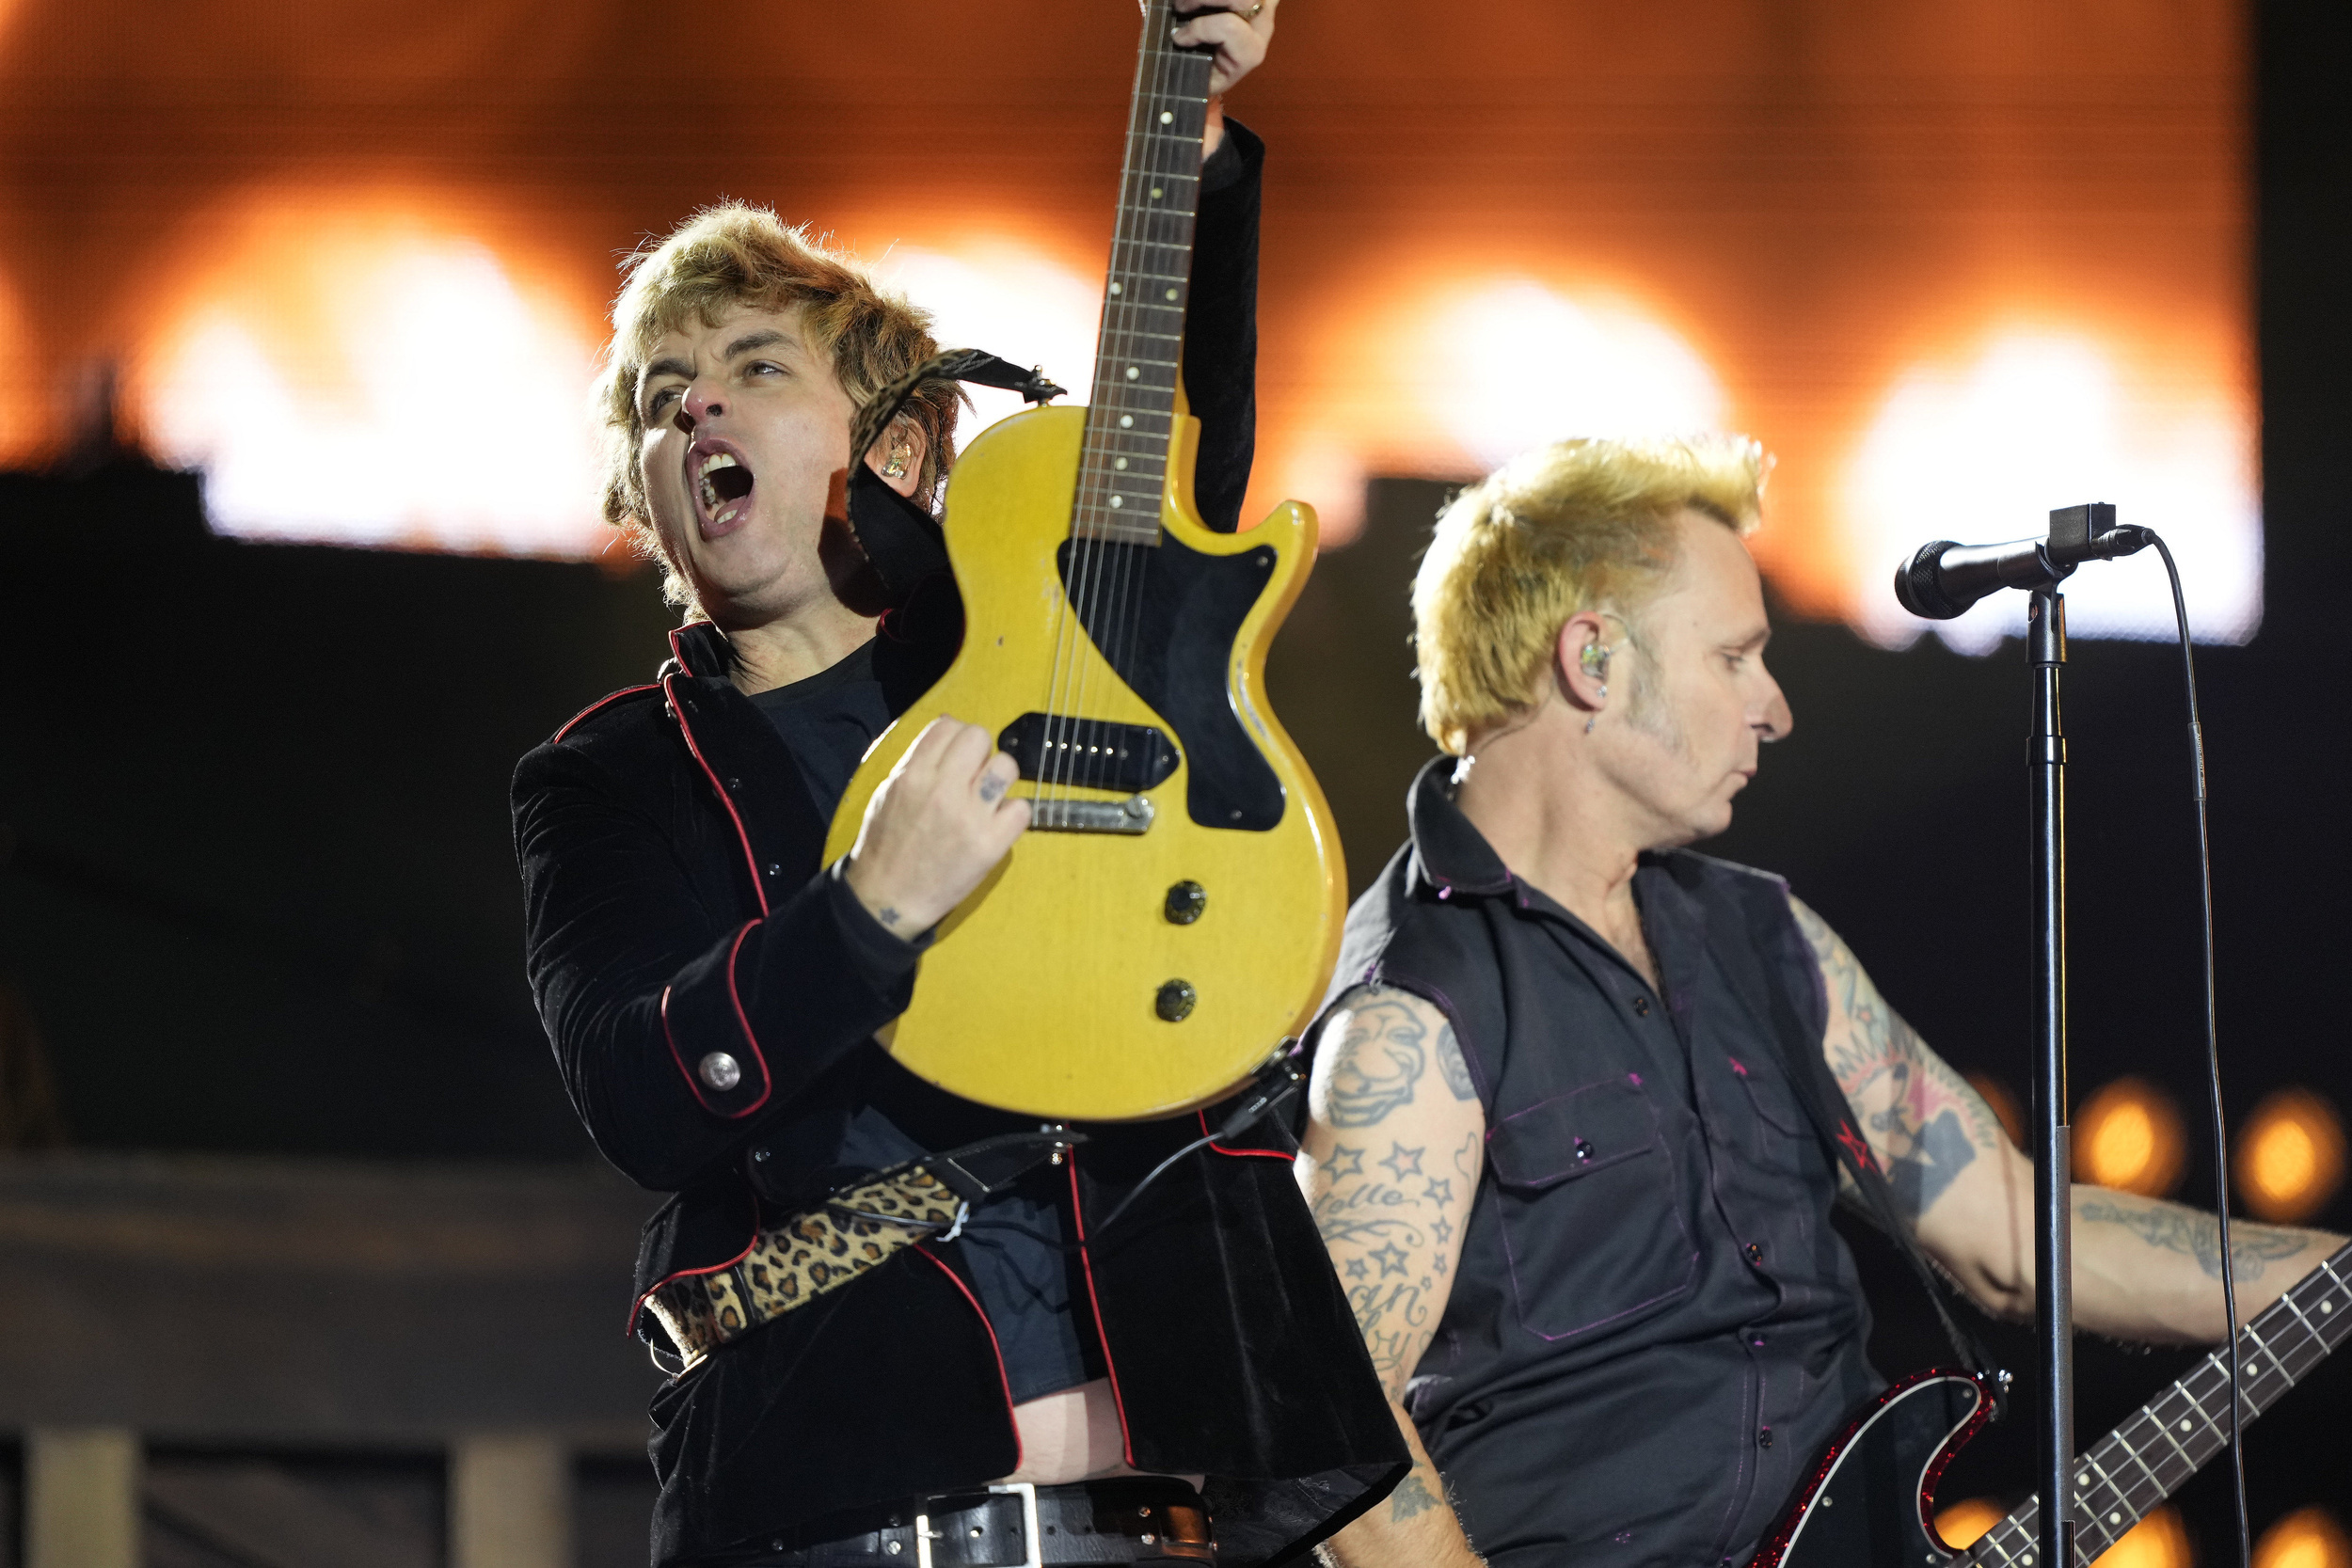 <p>This is going to be a massive year for Green Day, and The Saviors Tour should be one big party. In addition to supporting the band's 14th studio release, <em>Saviors </em>(officially dropped on Jan. 19), which includes already popular singles "The American Dream Is Killing Me" and "<a href="https://www.youtube.com/watch?v=jH3wmjaoADY">Look Ma, No Brains!</a>," the band is celebrating the 20th anniversary release of <em>American Idiot</em> and 30 years of <em>Dookie</em>. The tour kicks off in Europe in late May 30, then opens in North America in late July and concludes in San Diego on Sept. 29. The Hives are among the opening acts in Europe, with Smashing Pumpkins, Rancid and The Linda Lindas supporting in the U.S. and Canada.</p><p>You may also like: <a href='https://www.yardbarker.com/entertainment/articles/20_of_the_most_iconic_hair_moments_in_cinema/s1__40165615'>20 of the most iconic hair moments in cinema</a></p>